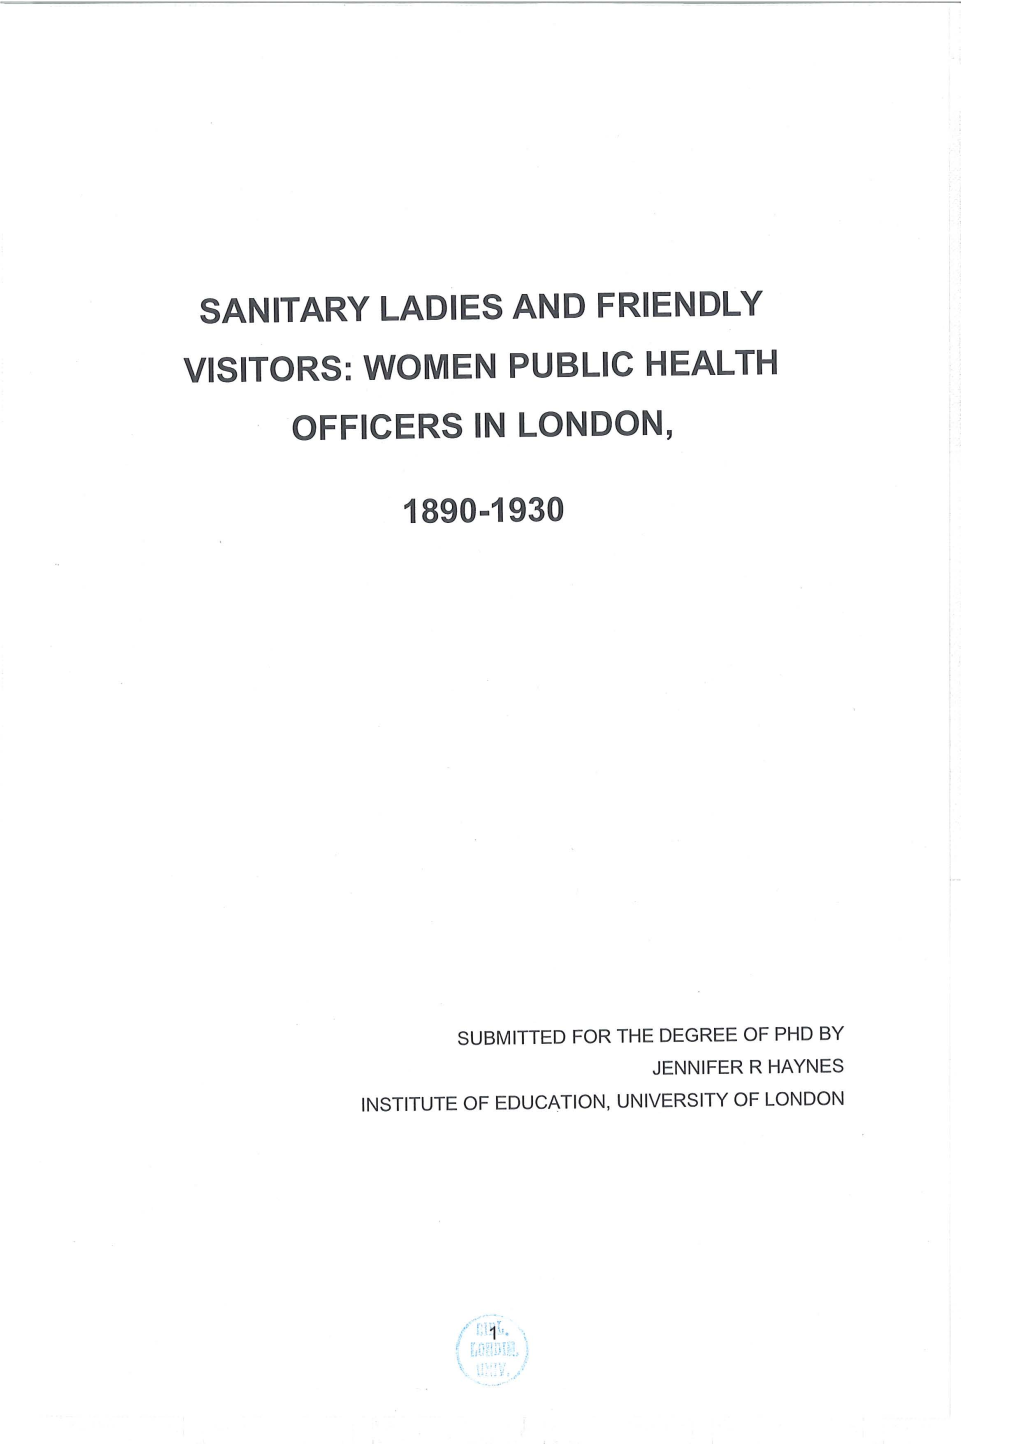 Sanitary Ladies and Friendly Visitors: Women Public Health Officers in London